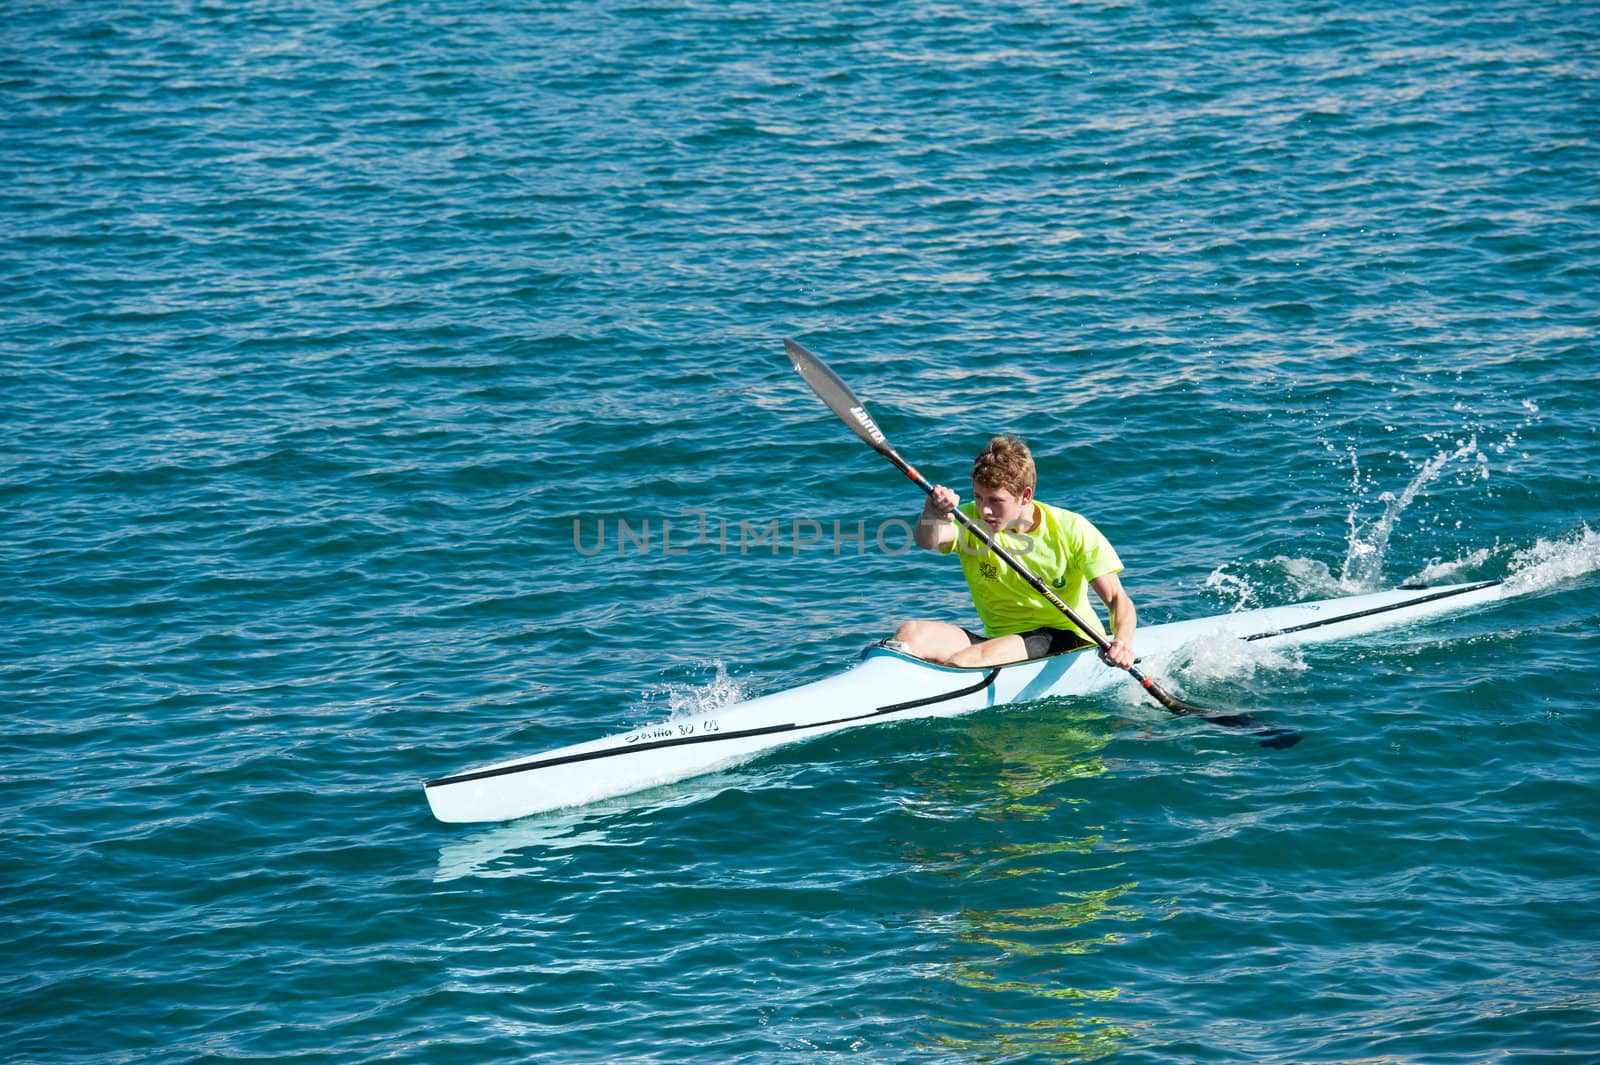 LAS PALMAS, SPAIN – MARCH 10: Unidentified man from club amigos del piraguismo in Canary Islands, kayaking during Boat and Marine Expo FIMAR 2012 on March 10, 2012 in Las Palmas, Spain
